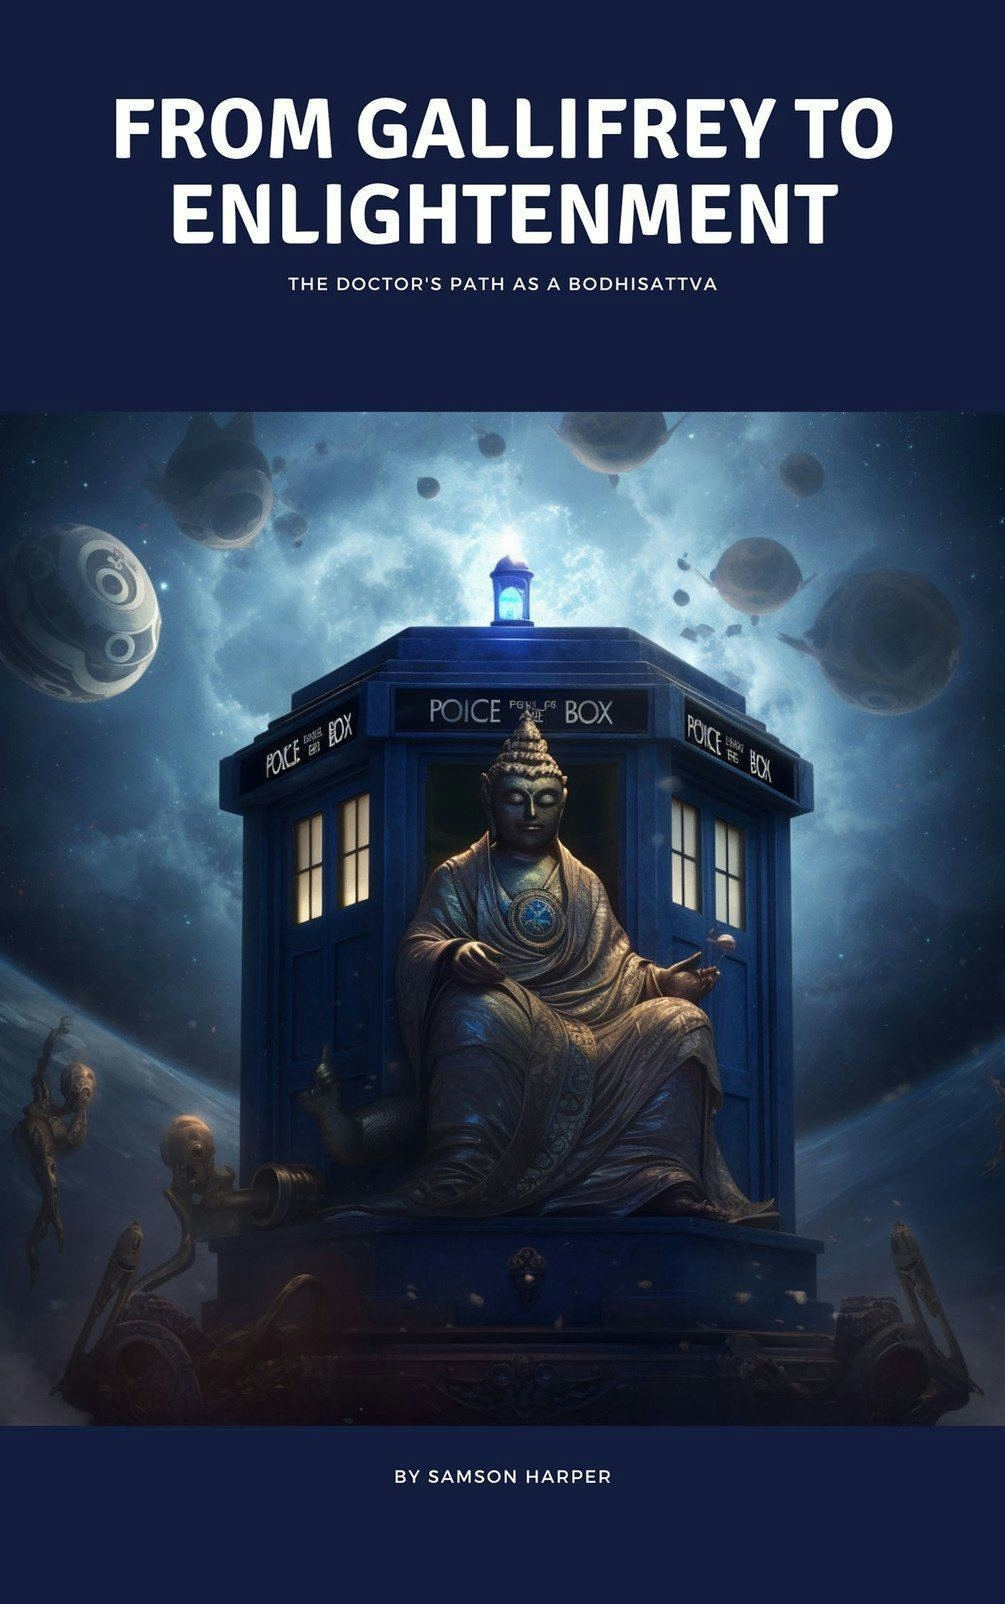 From Gallifrey to Enlightenment: The Doctor's Path as a Bodhisattva